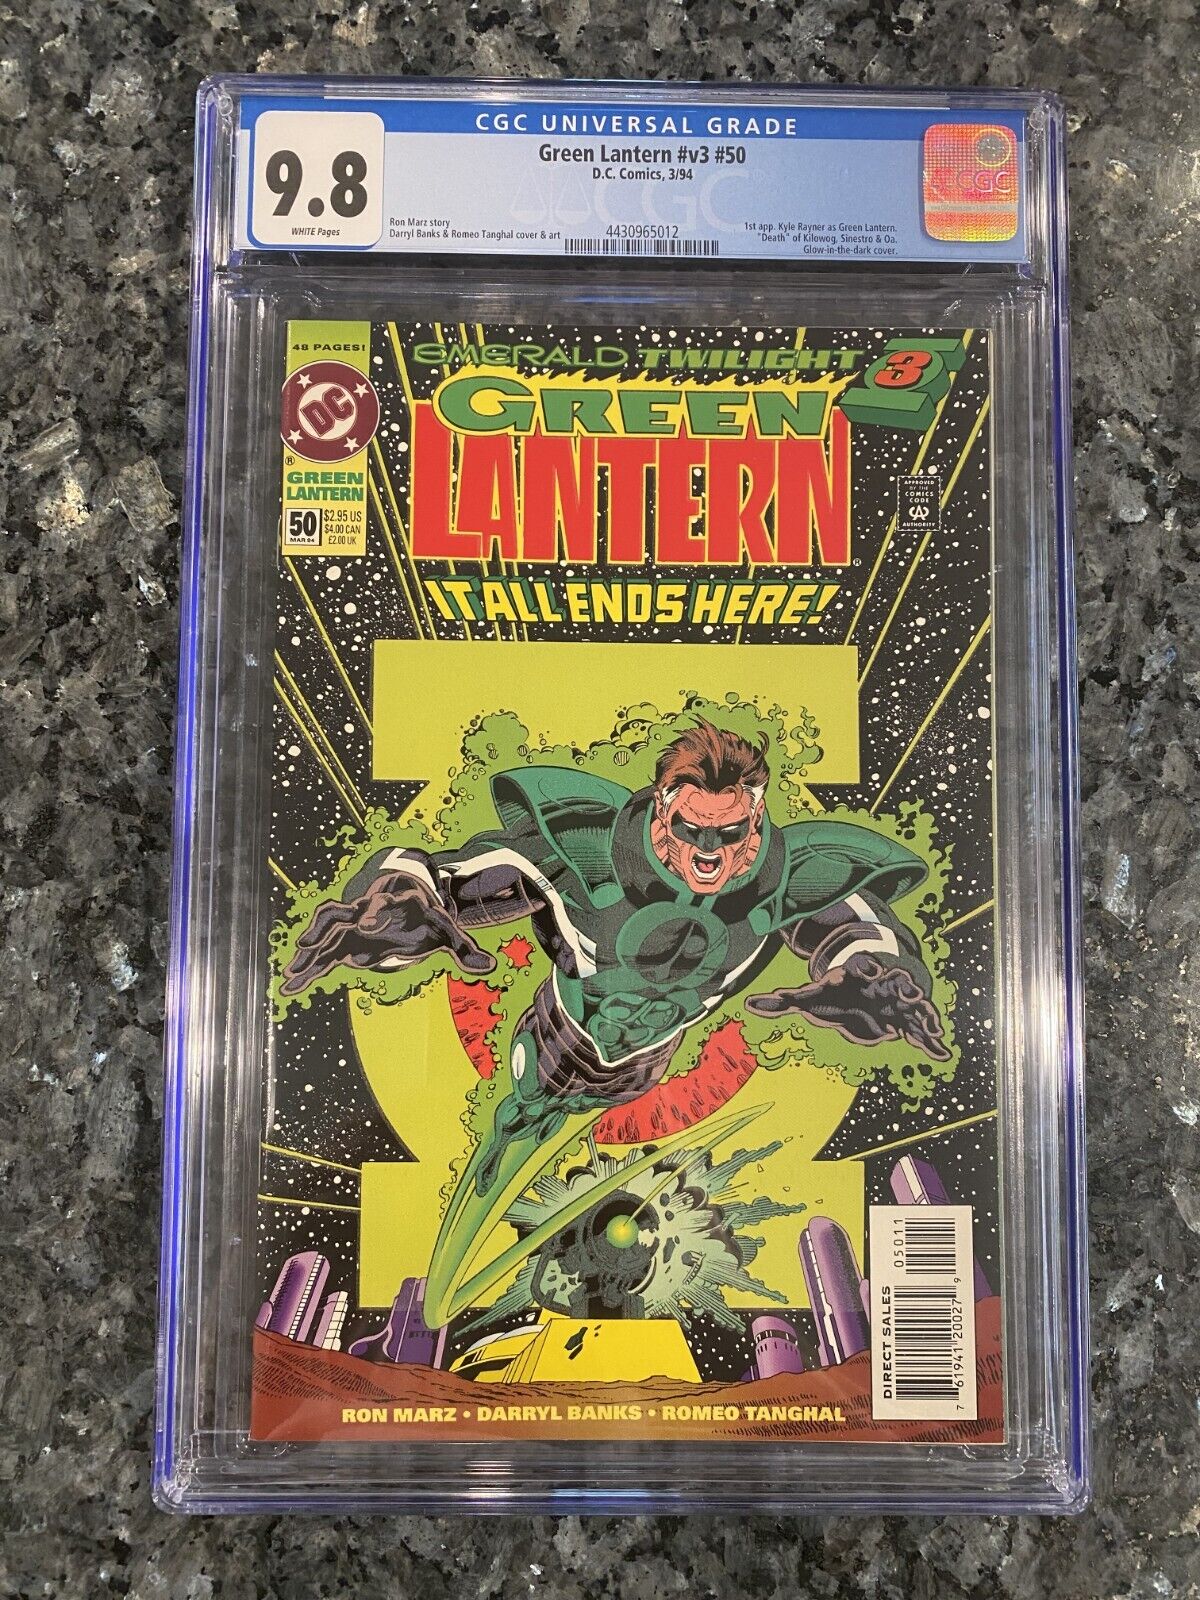 Green Lantern #50 (v3) - CGC 9.8 White Pages - Glow-in-the-Dark Cover